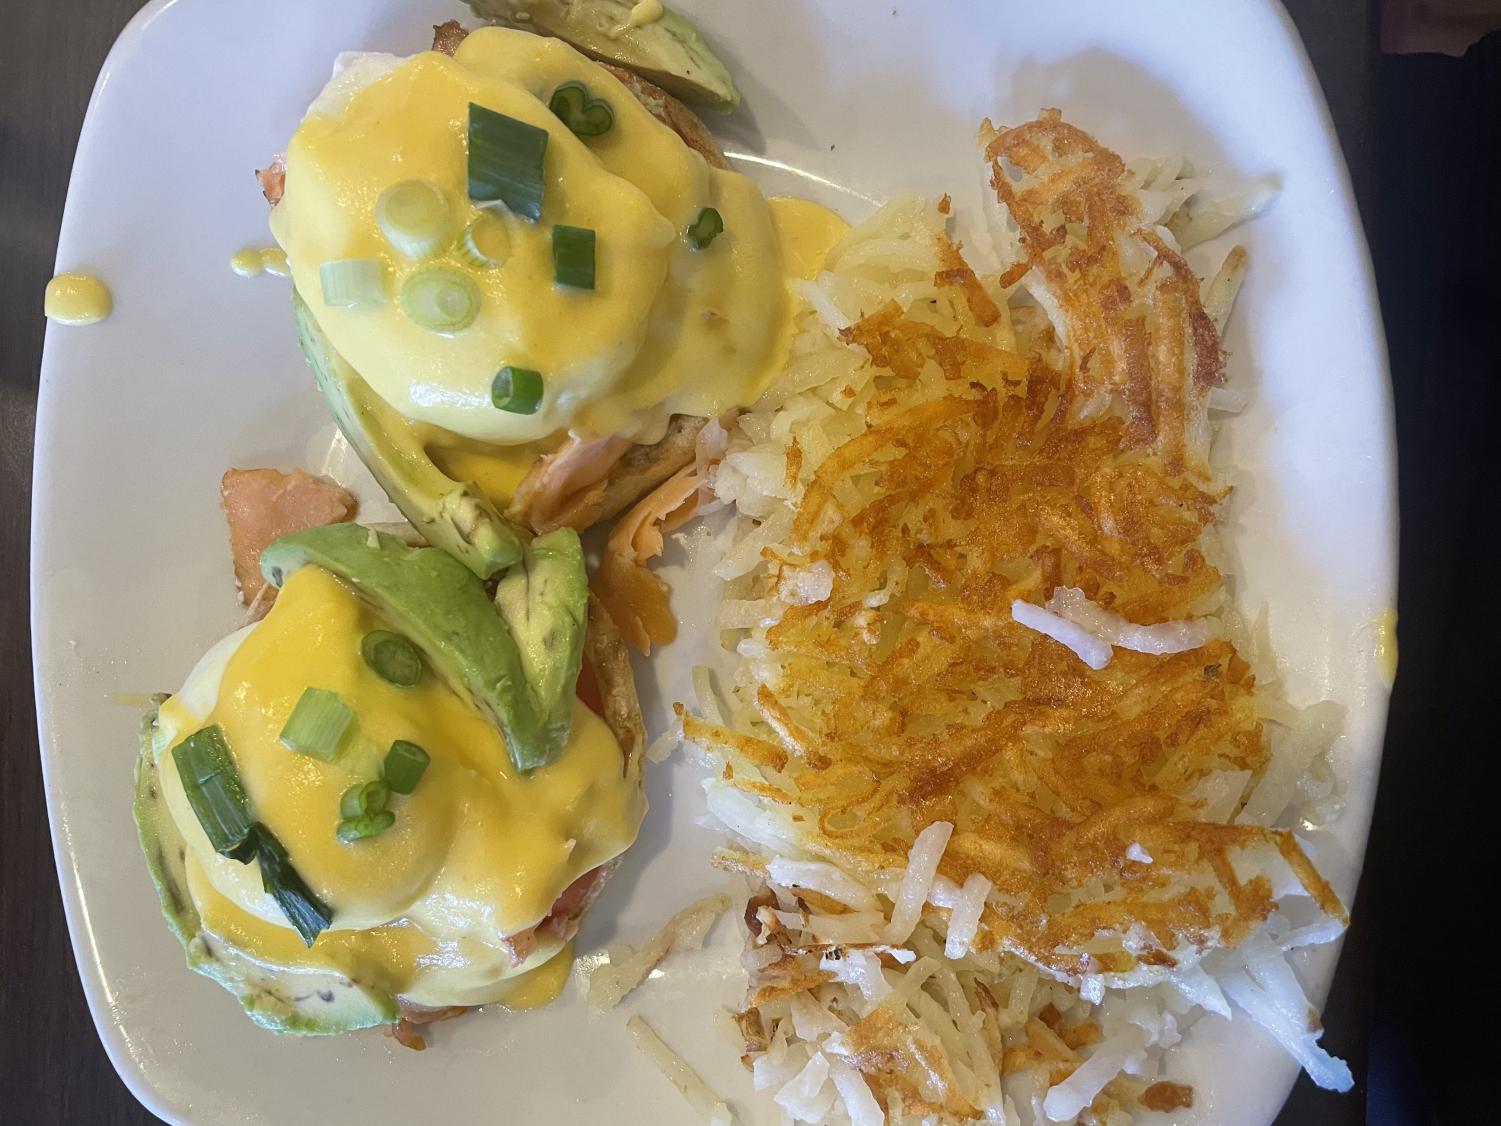 Despite the colorful appearance, the Salmon Eggs Benedict isn’t as tasty as it
looks. Photo by Sophia Woods